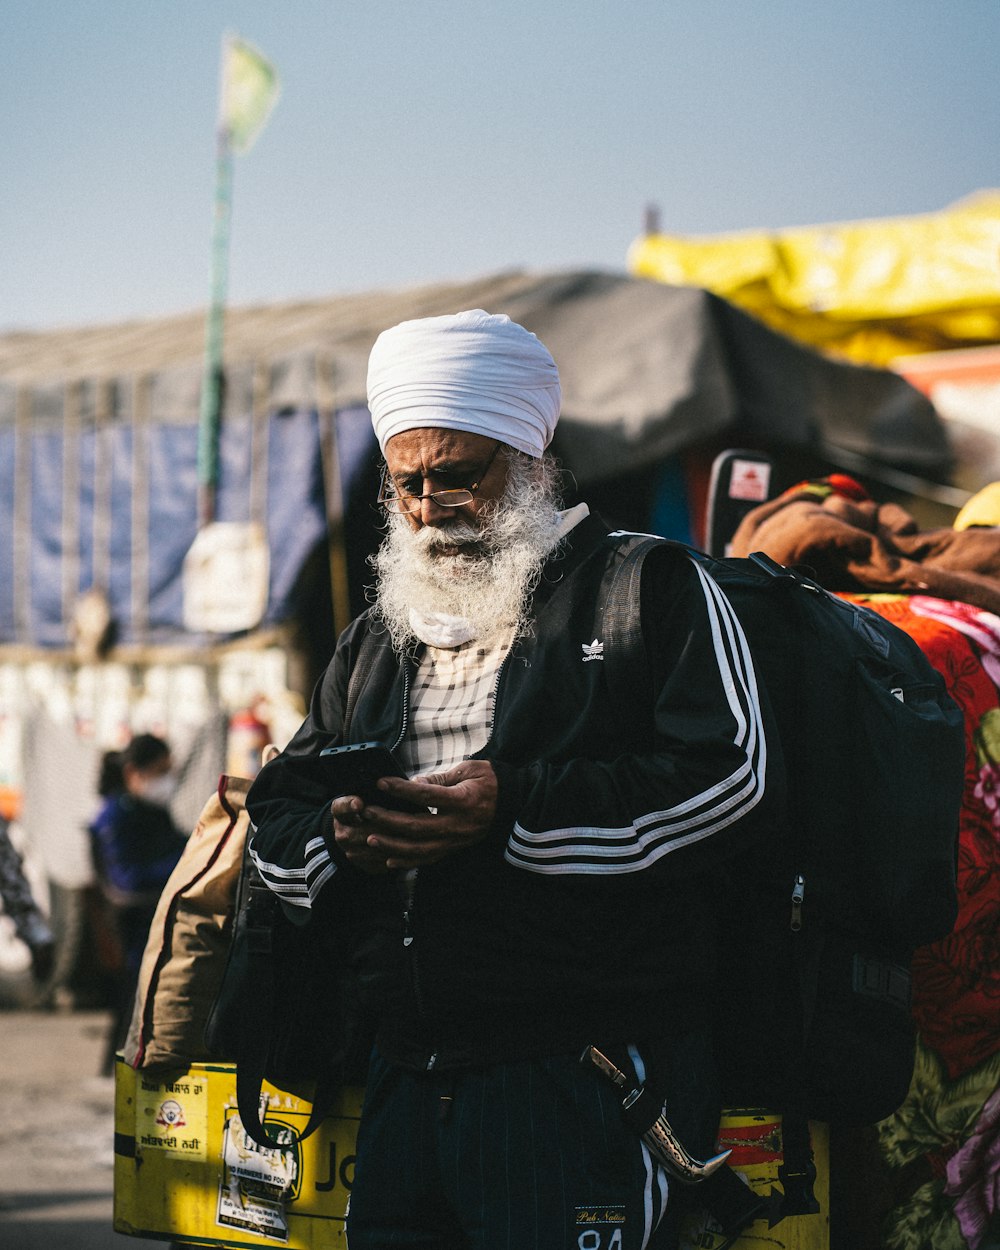 a man with a white turban is looking at his cell phone